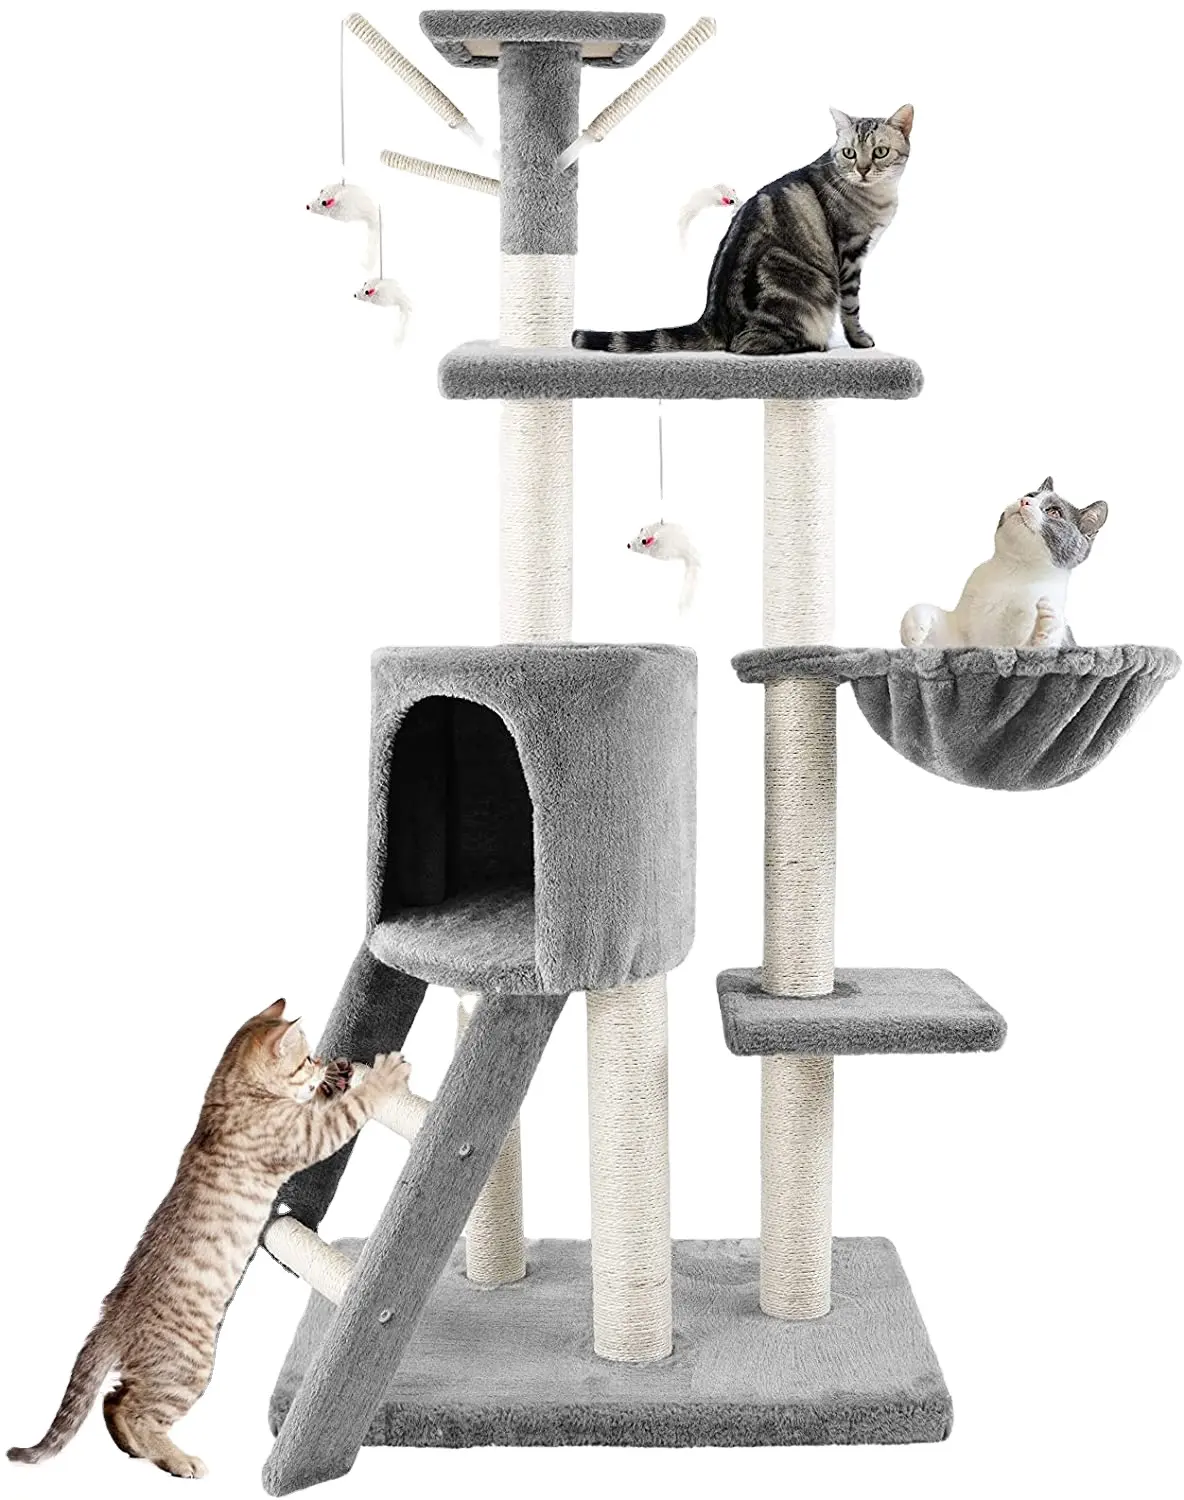 Multi-Level Kittens Platform Scratching Posts Condo wood Furniture Stand climbing cat tree house large